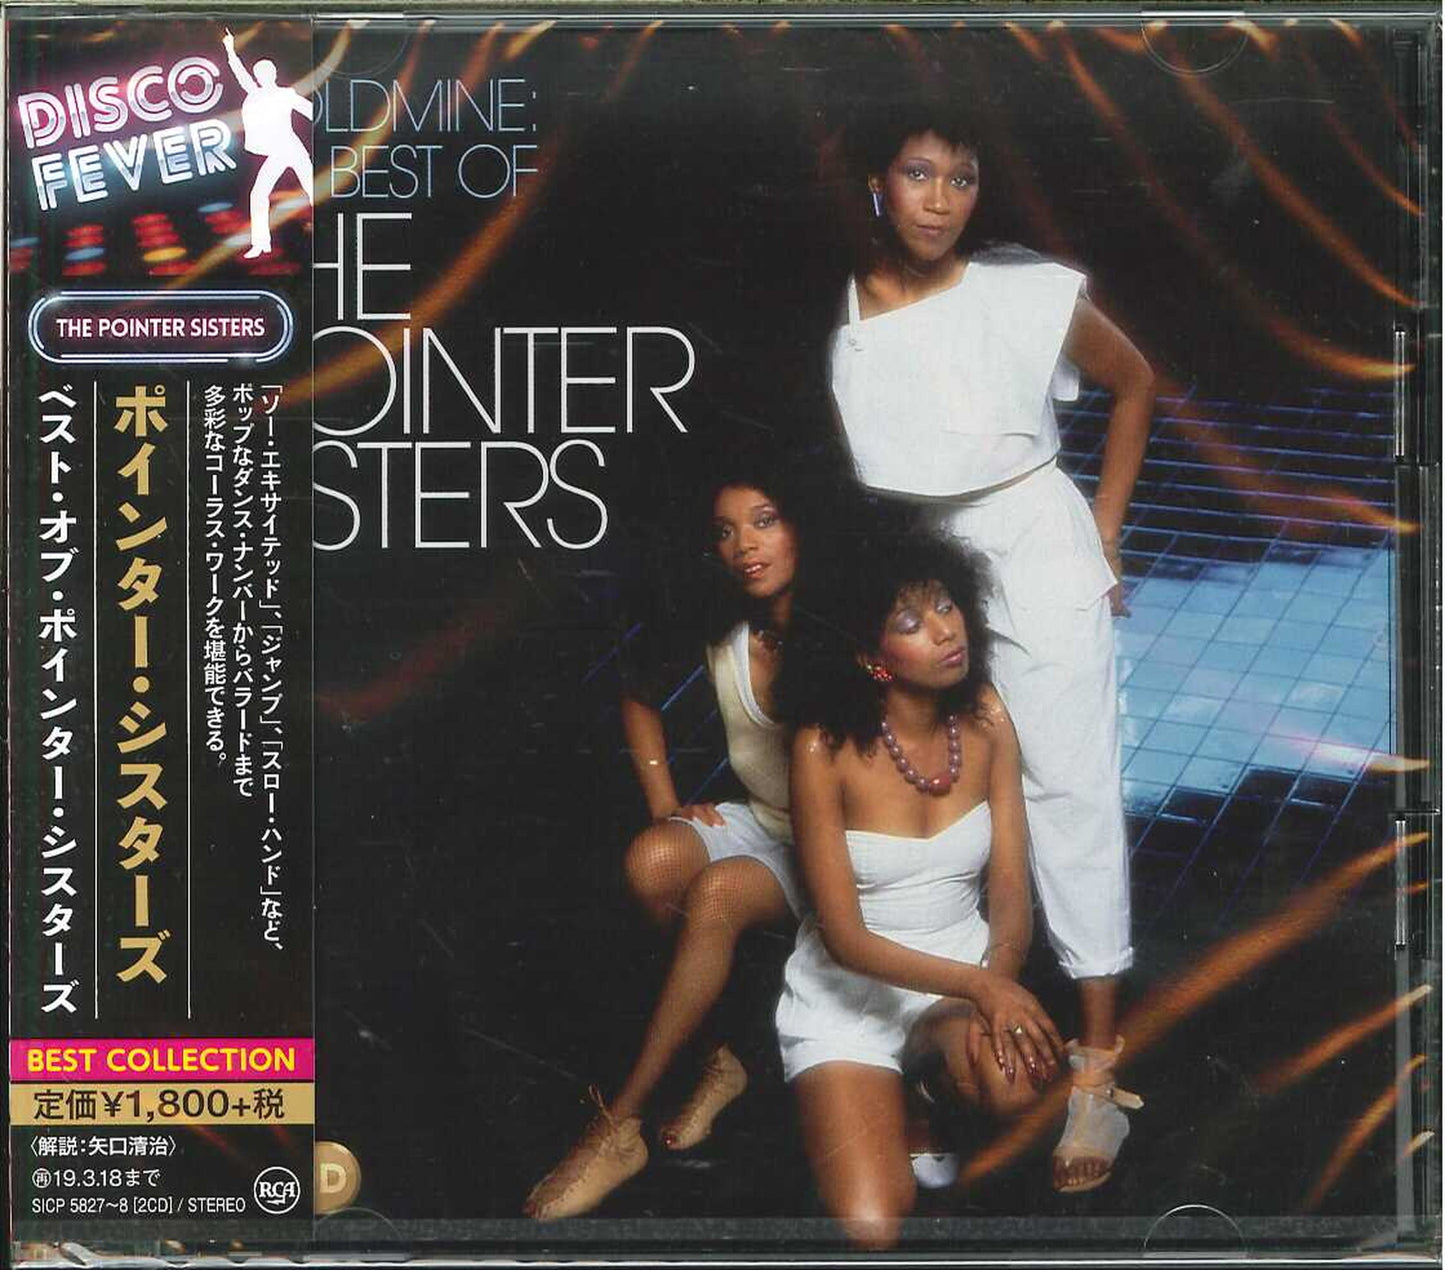 The Pointer Sisters - Goldmine: The Best Of The Pointer Sisters - Japan  2 CD